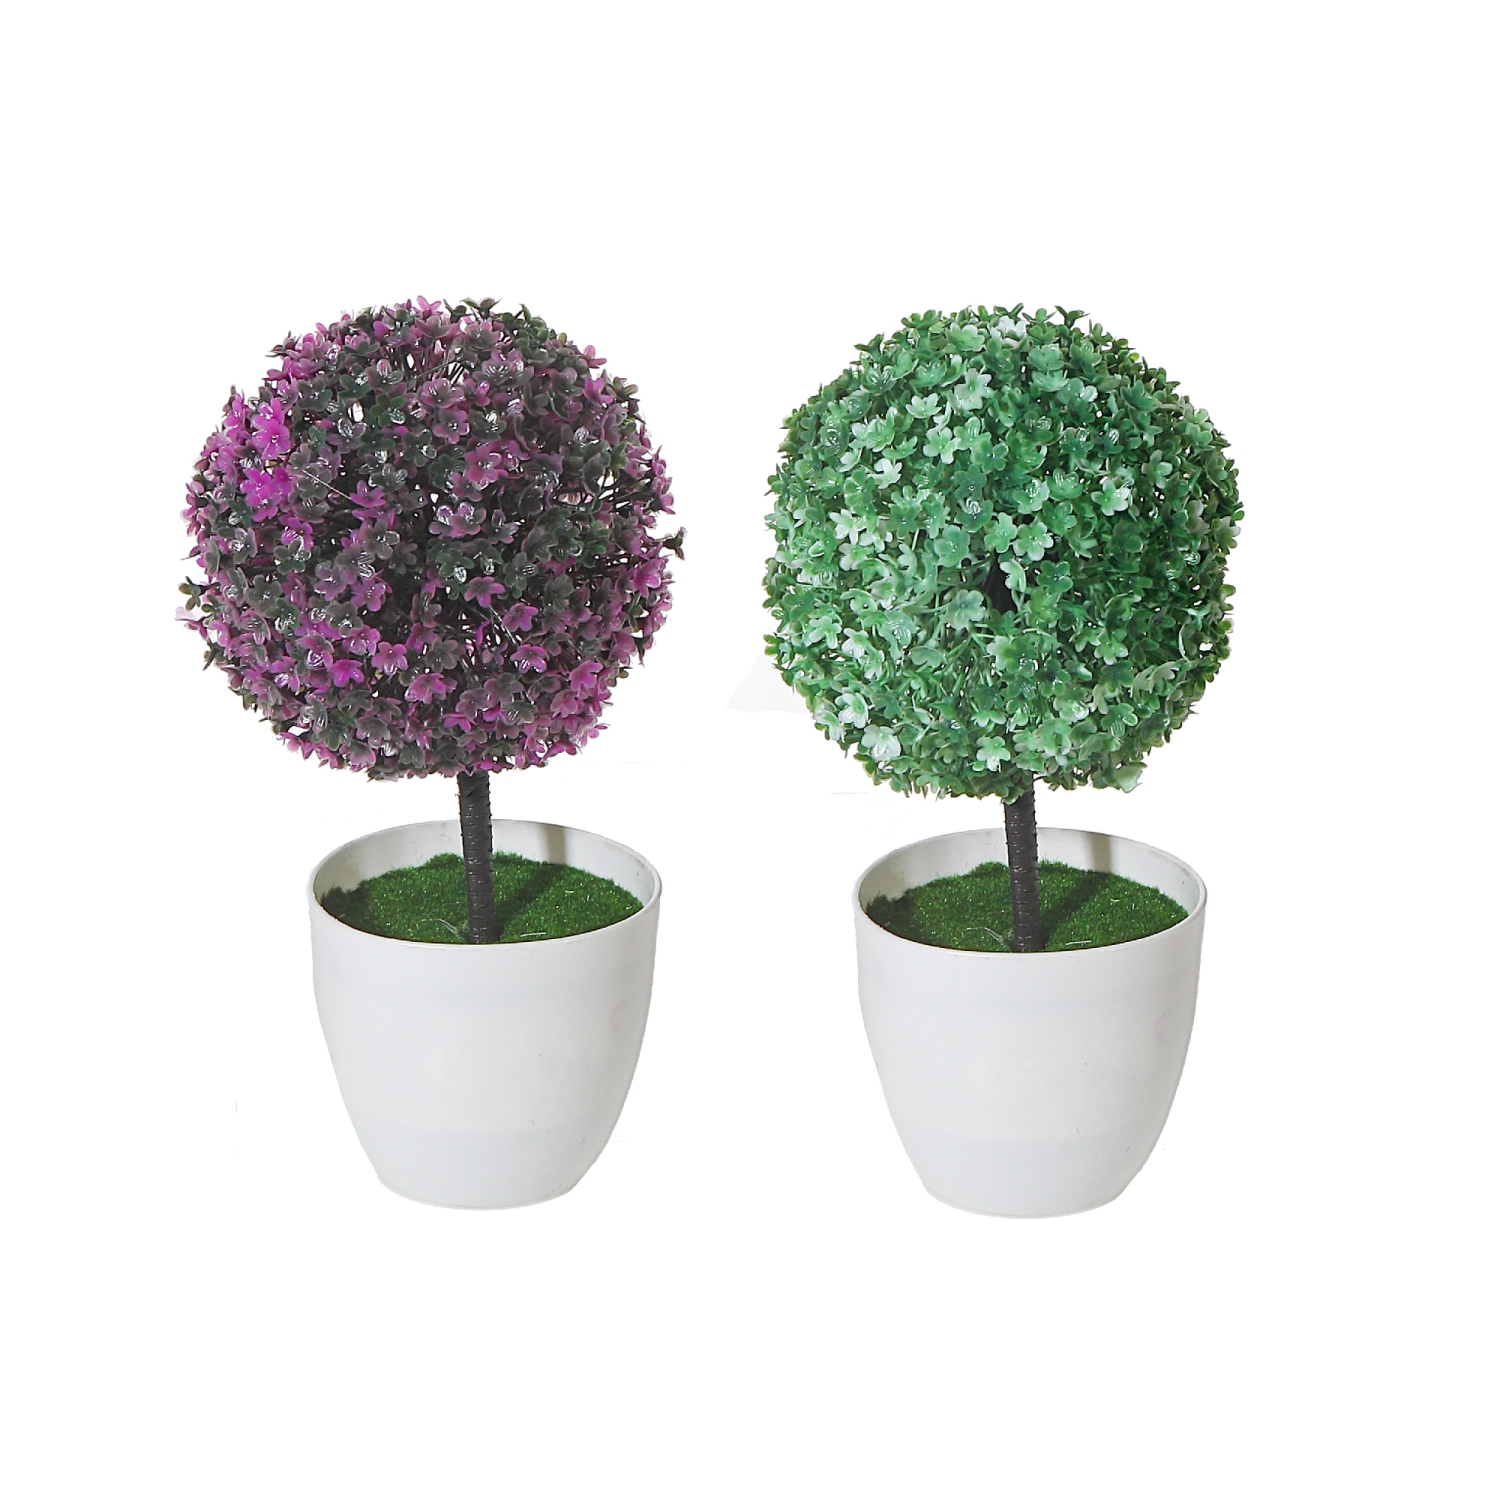 Maison Concepts Artificial Topiary Ball Plant In White Pot Asstd - Set of 2